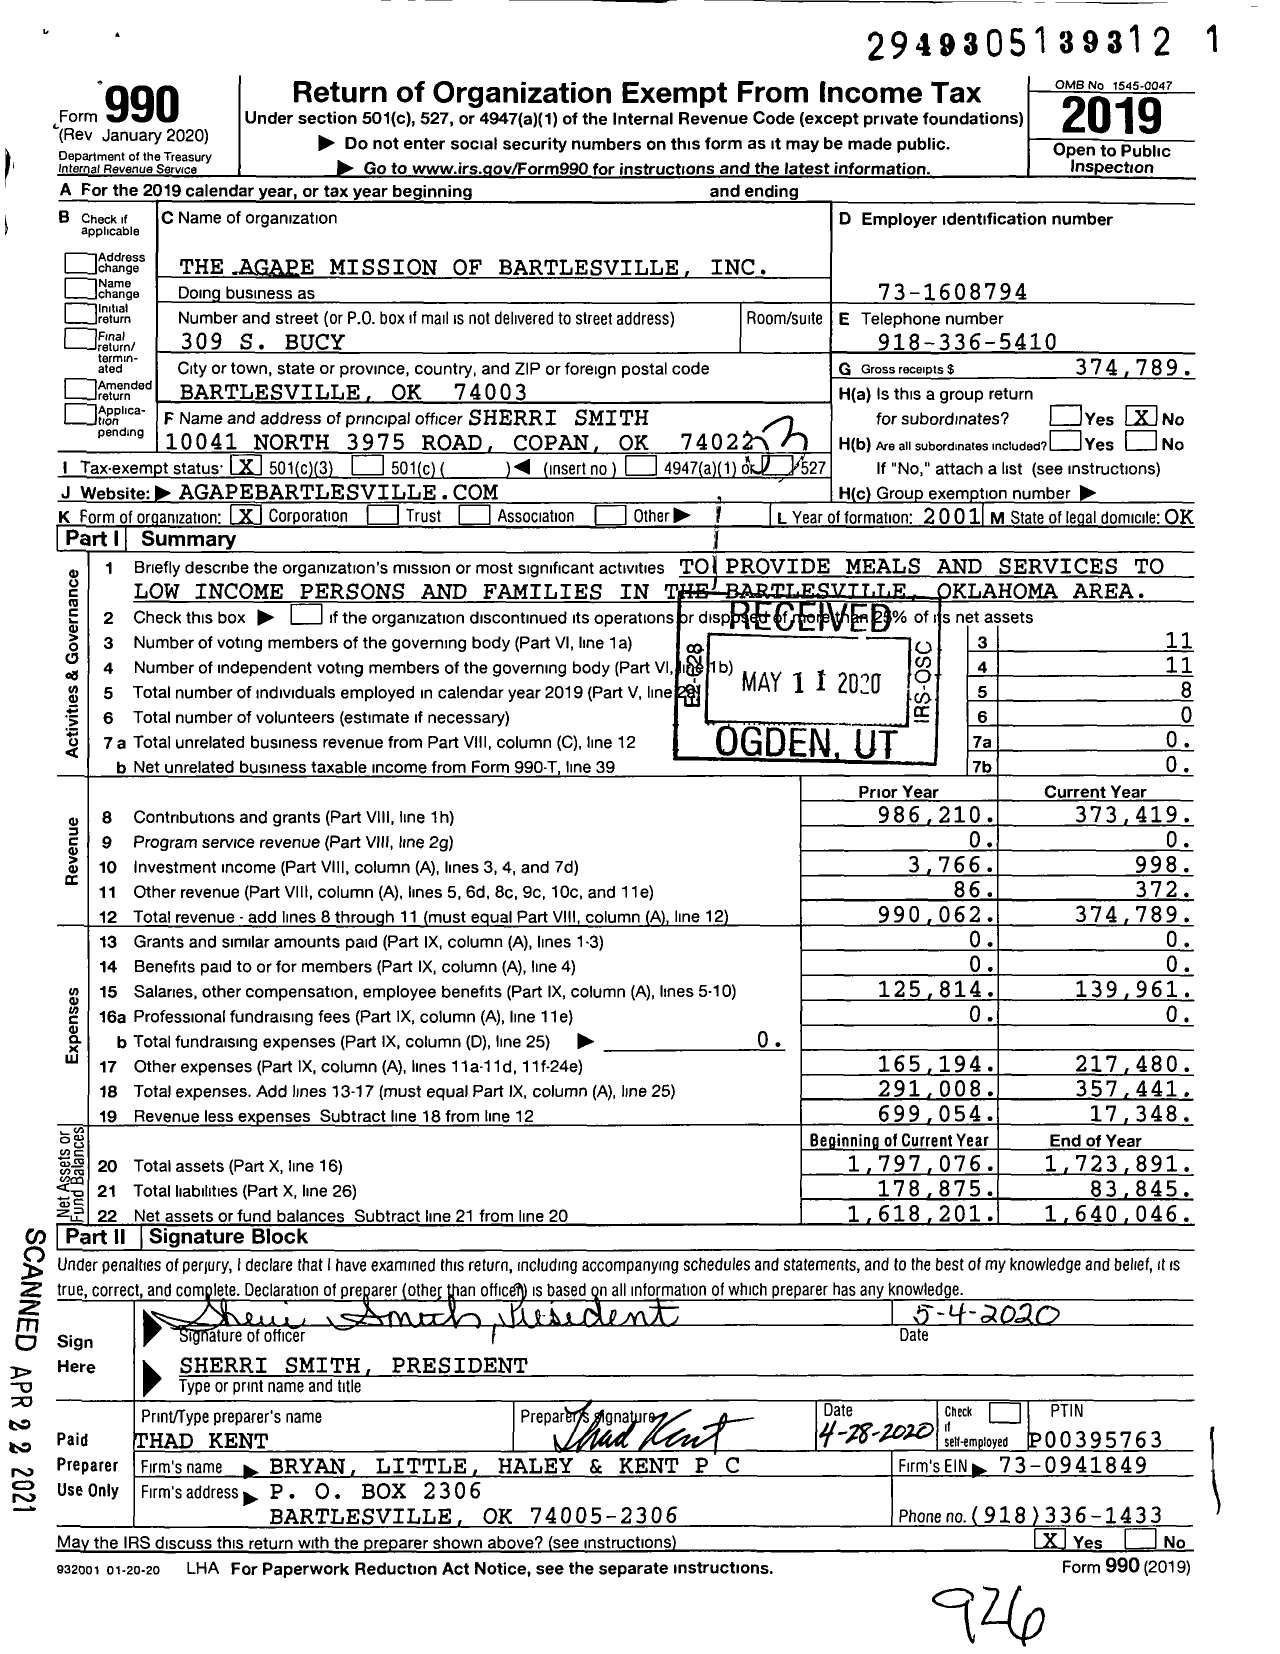 Image of first page of 2019 Form 990 for The Agape Mission of Bartlesville